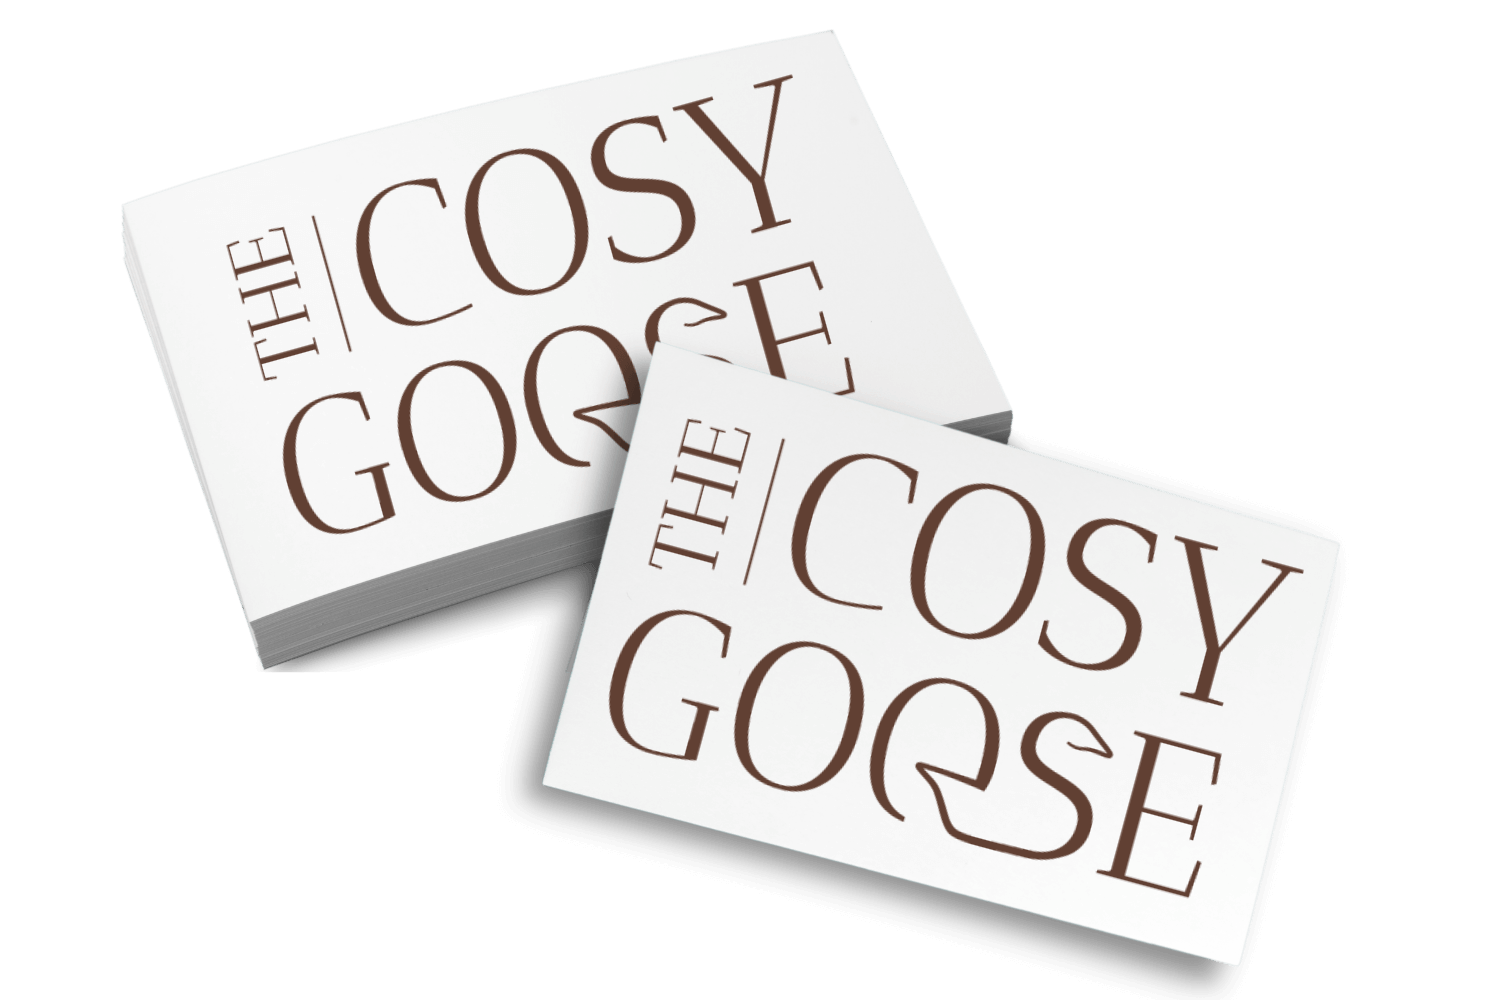 Cosy goose company logo business card mockup graphic design at Big Red Jelly.